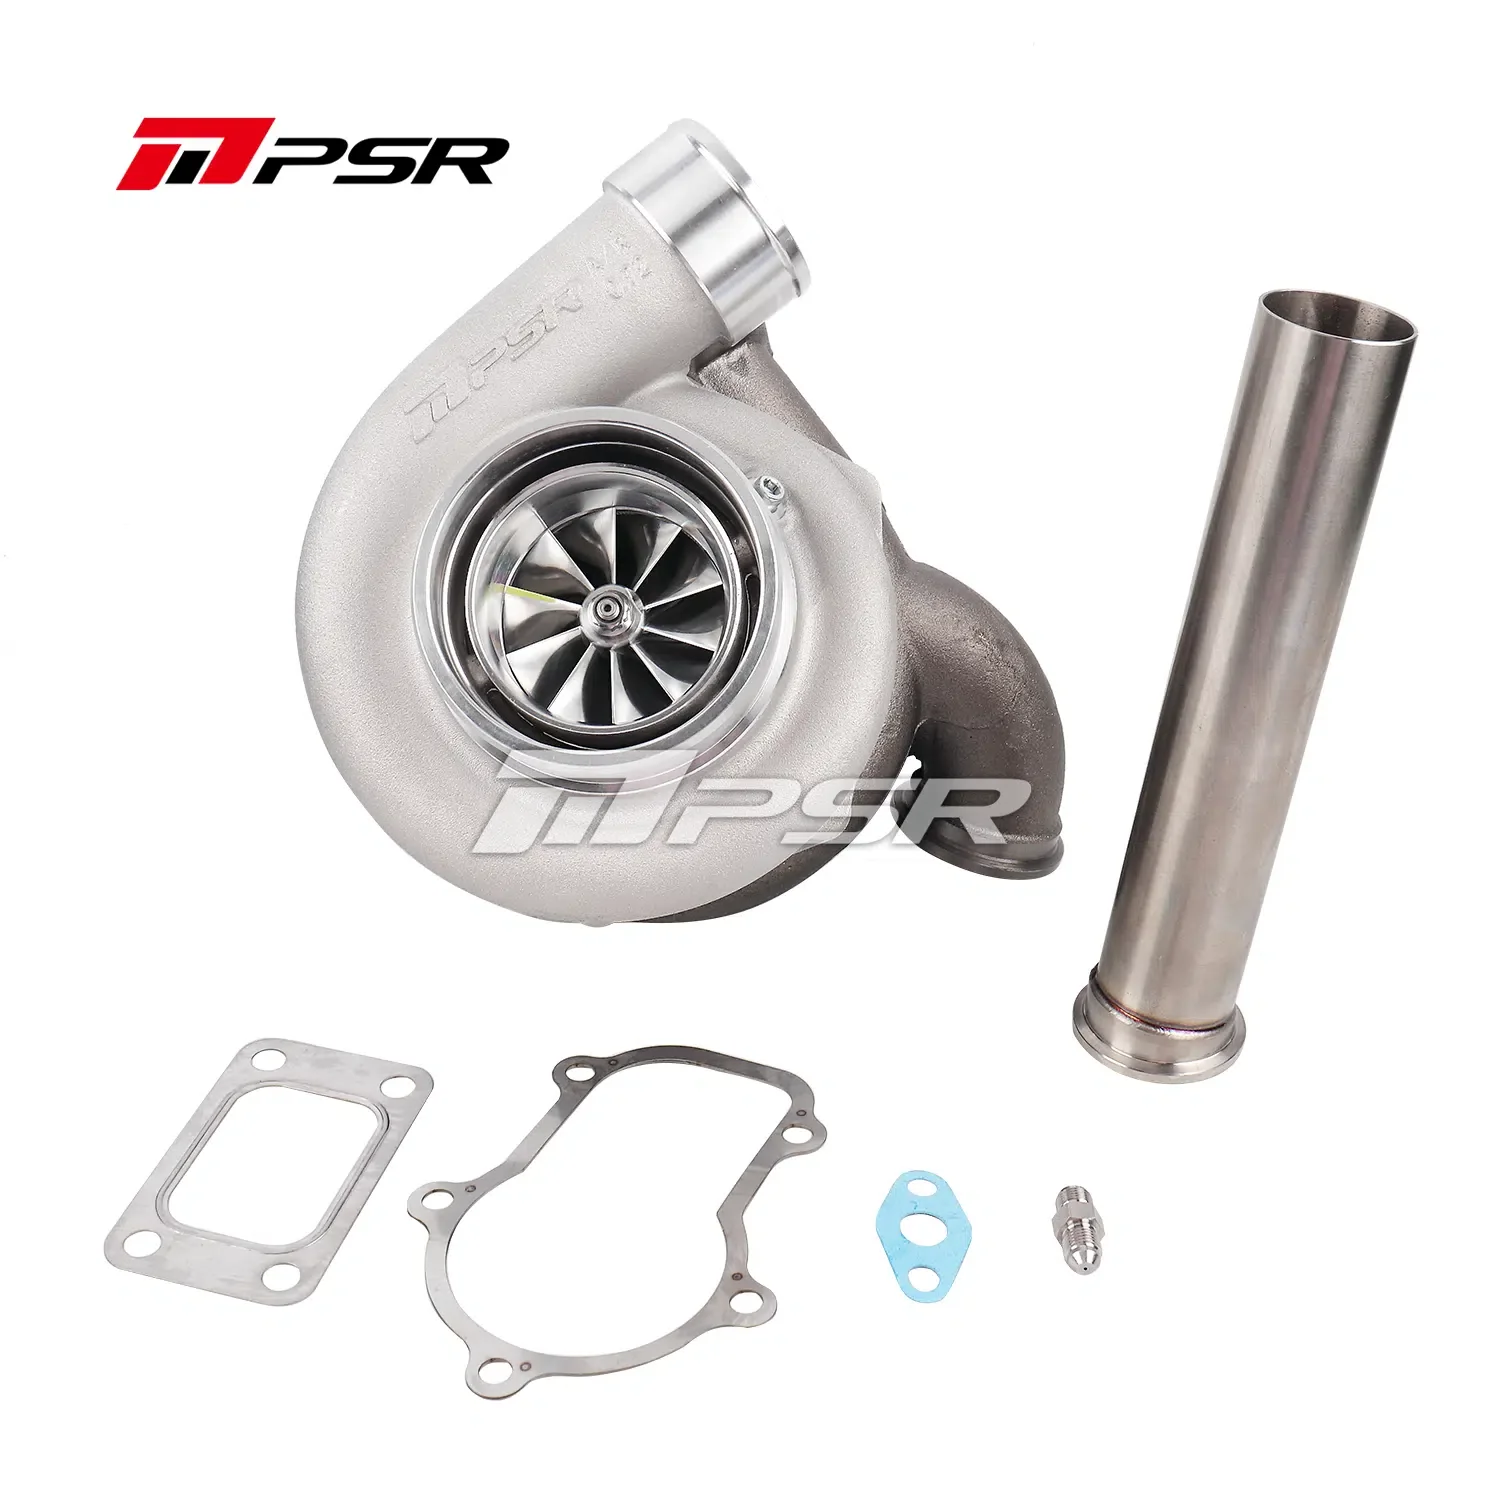 PULSAR Next GEN PSR6782 Turbocharger External Wastegate Version for Ford Falcon to replace the factory PT3582R turbo